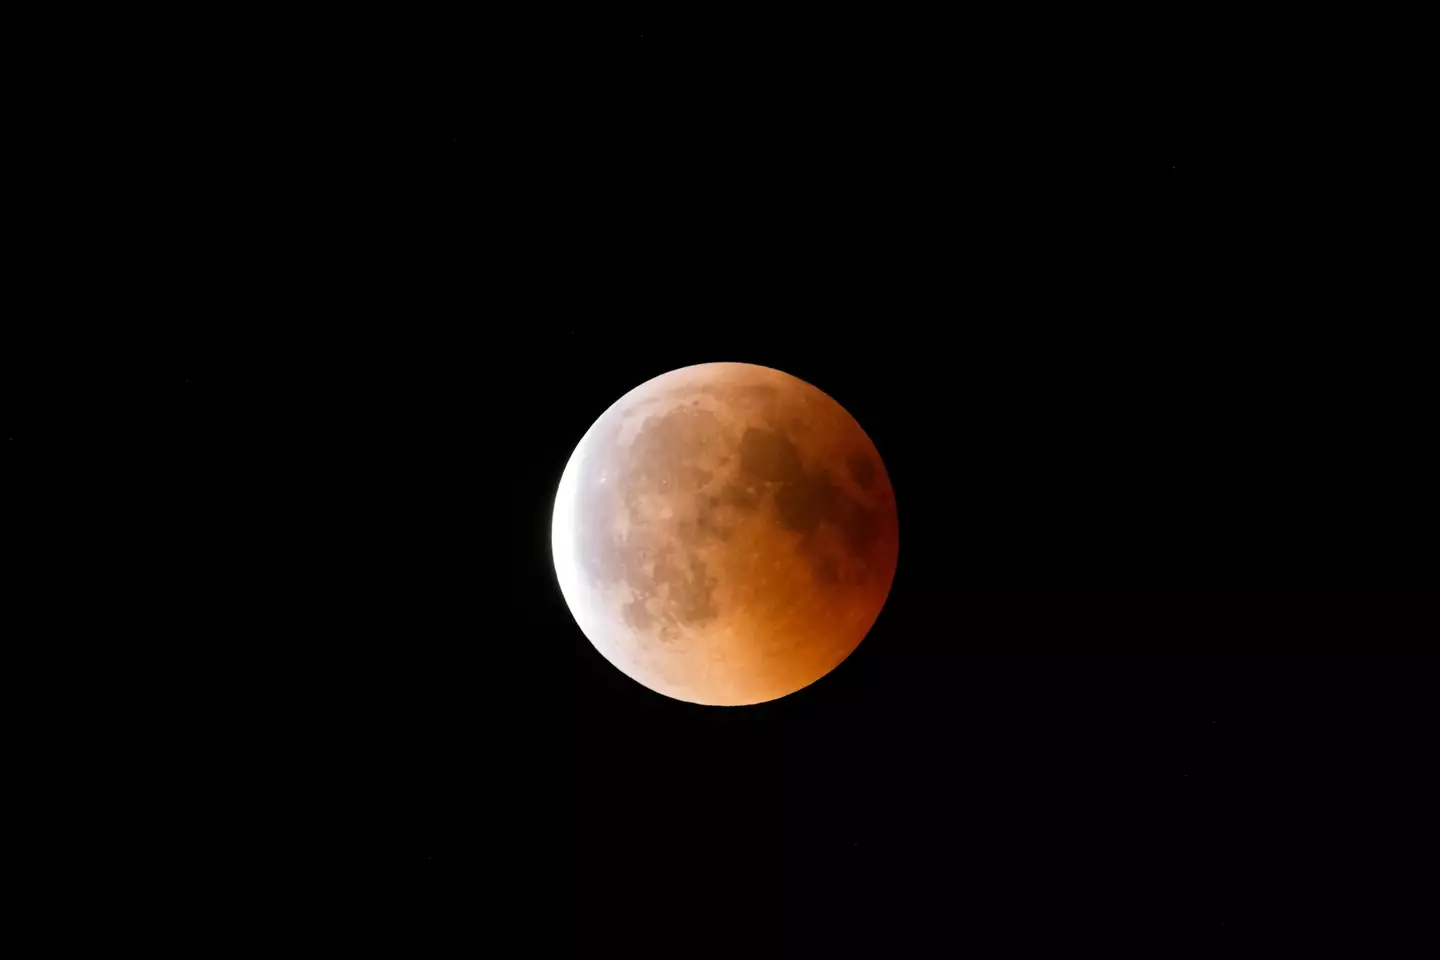 The lunar eclipse will kick off on 15 May.